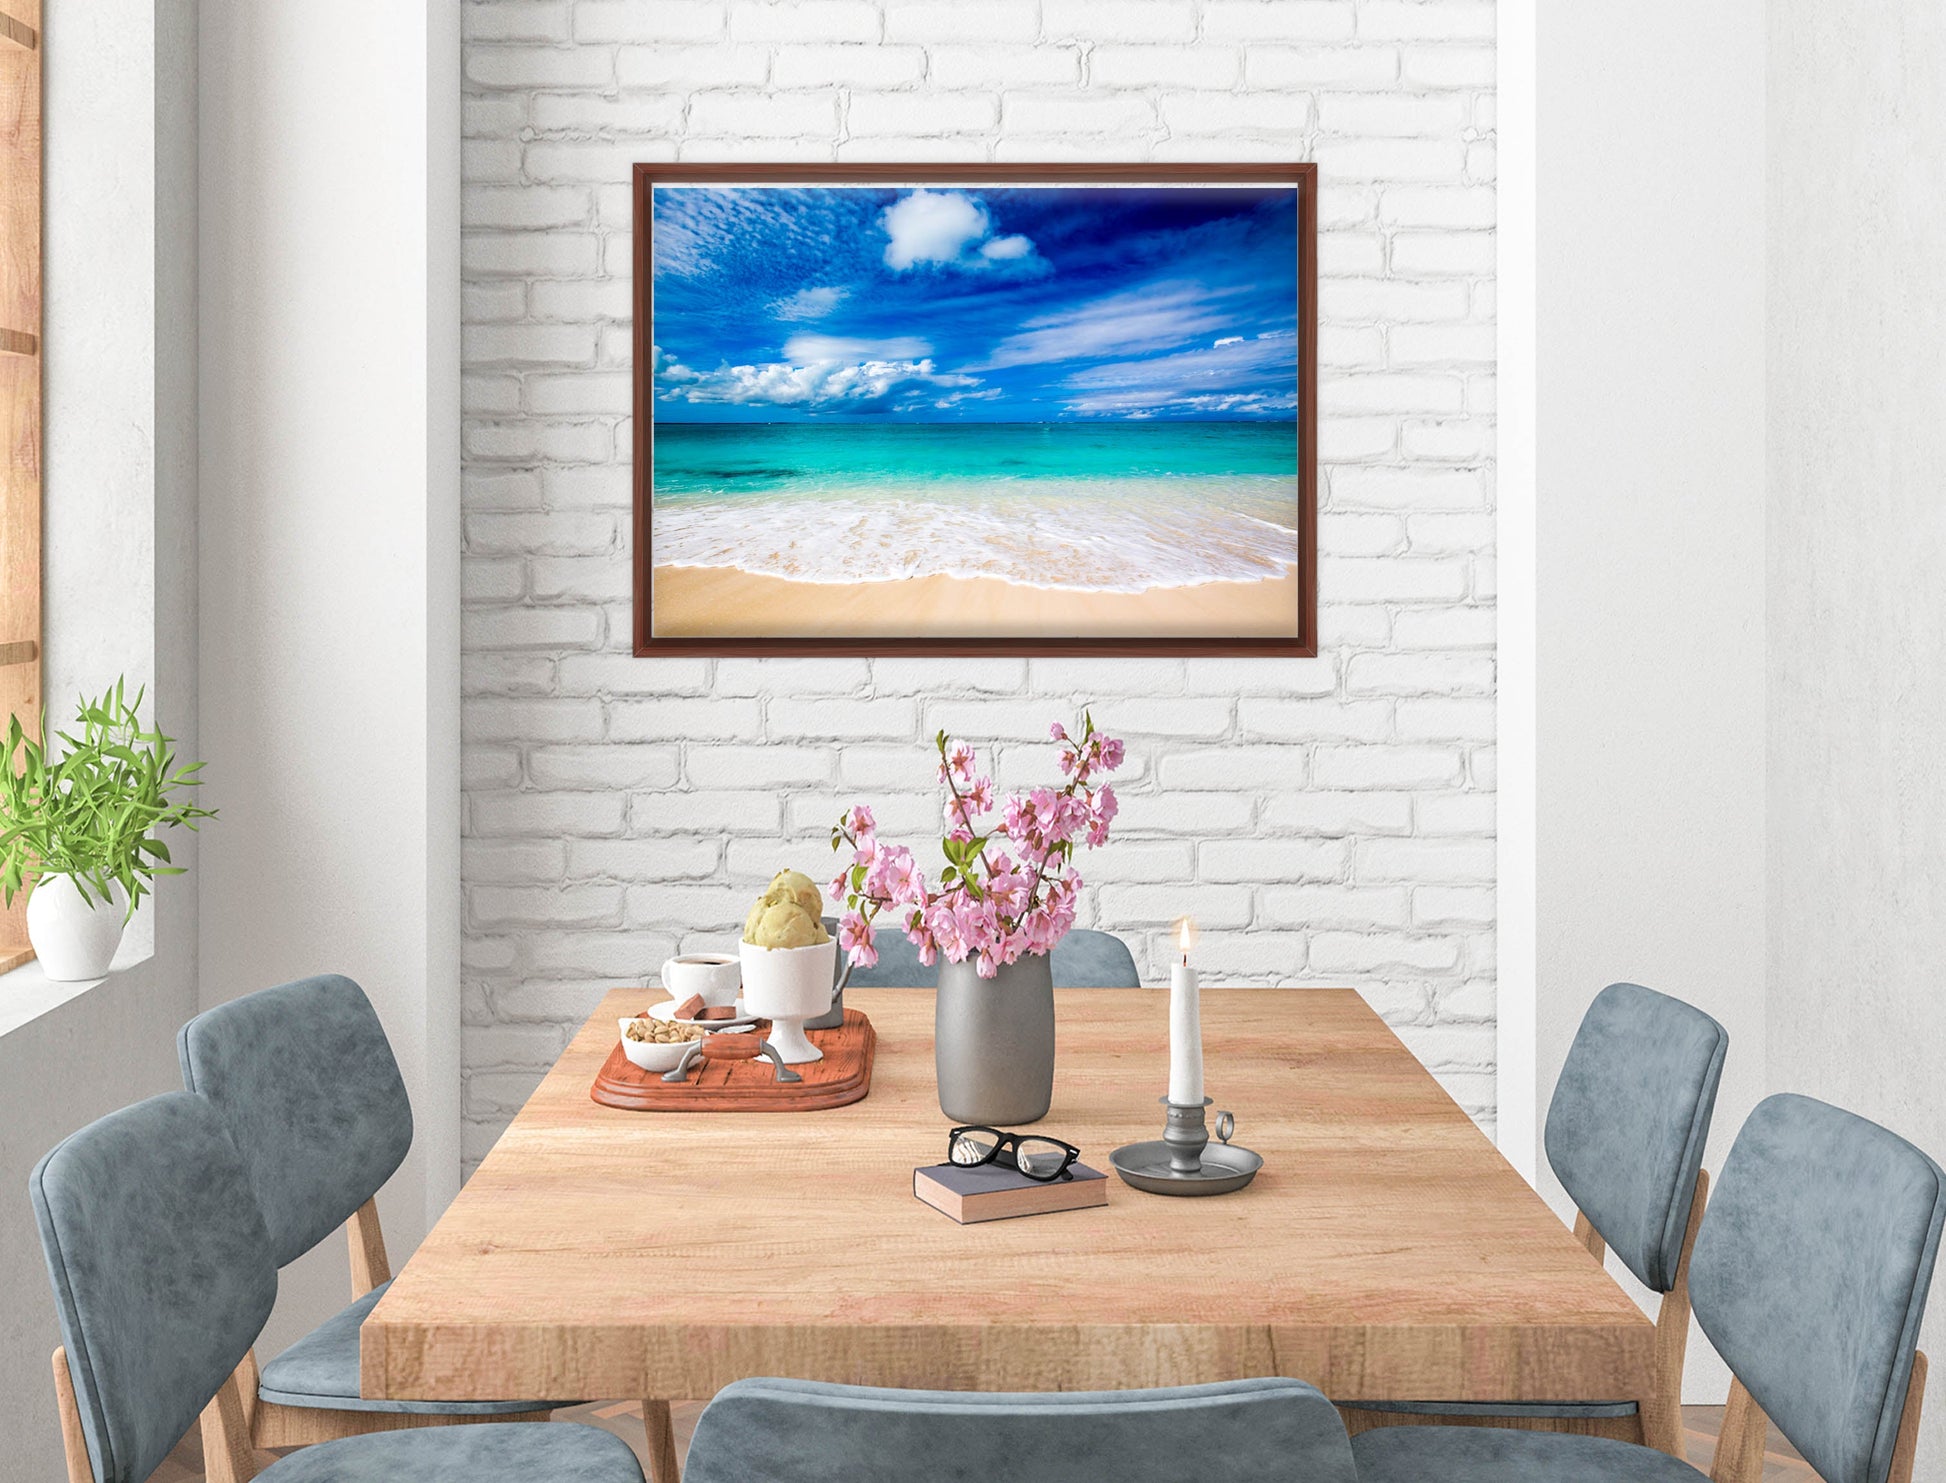 White Sand Beach - Evening on the Pond - Canvas Wrap - Mahogany Frame on Dining Room Room Wall